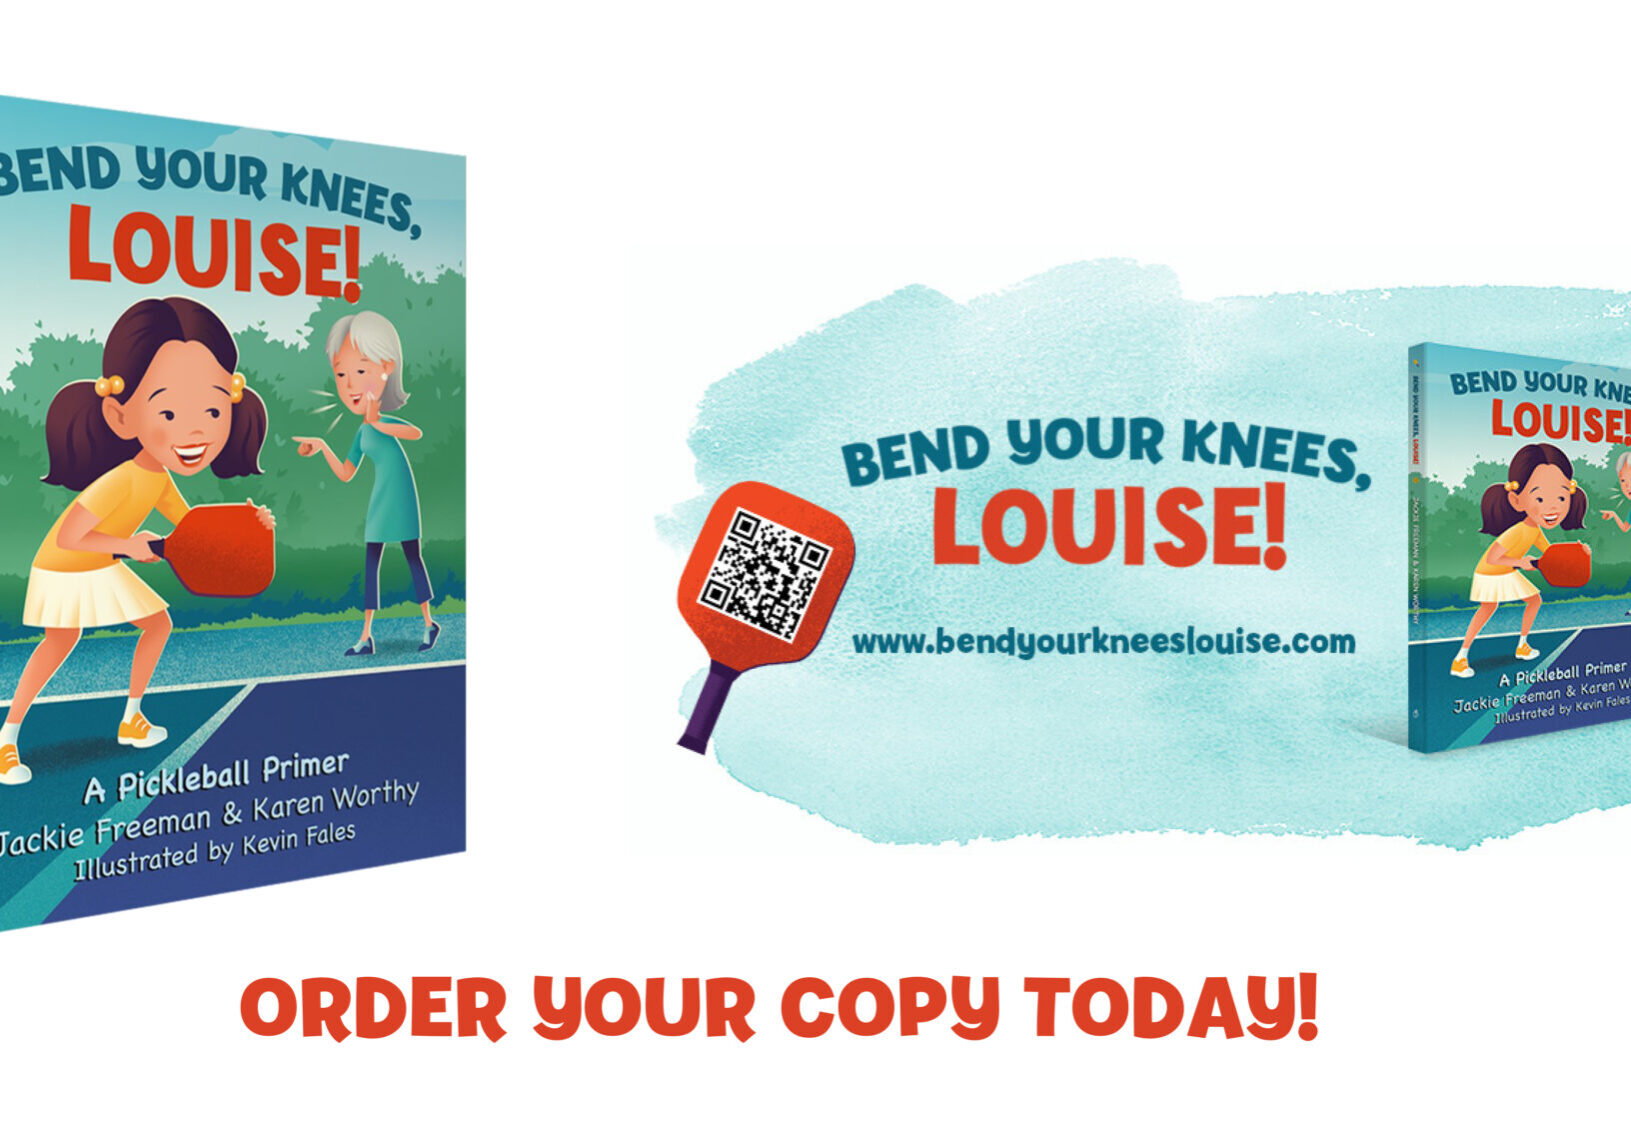 XXXXX_BEND-YOUR-KNEES-LOUISE_POSTER.indd